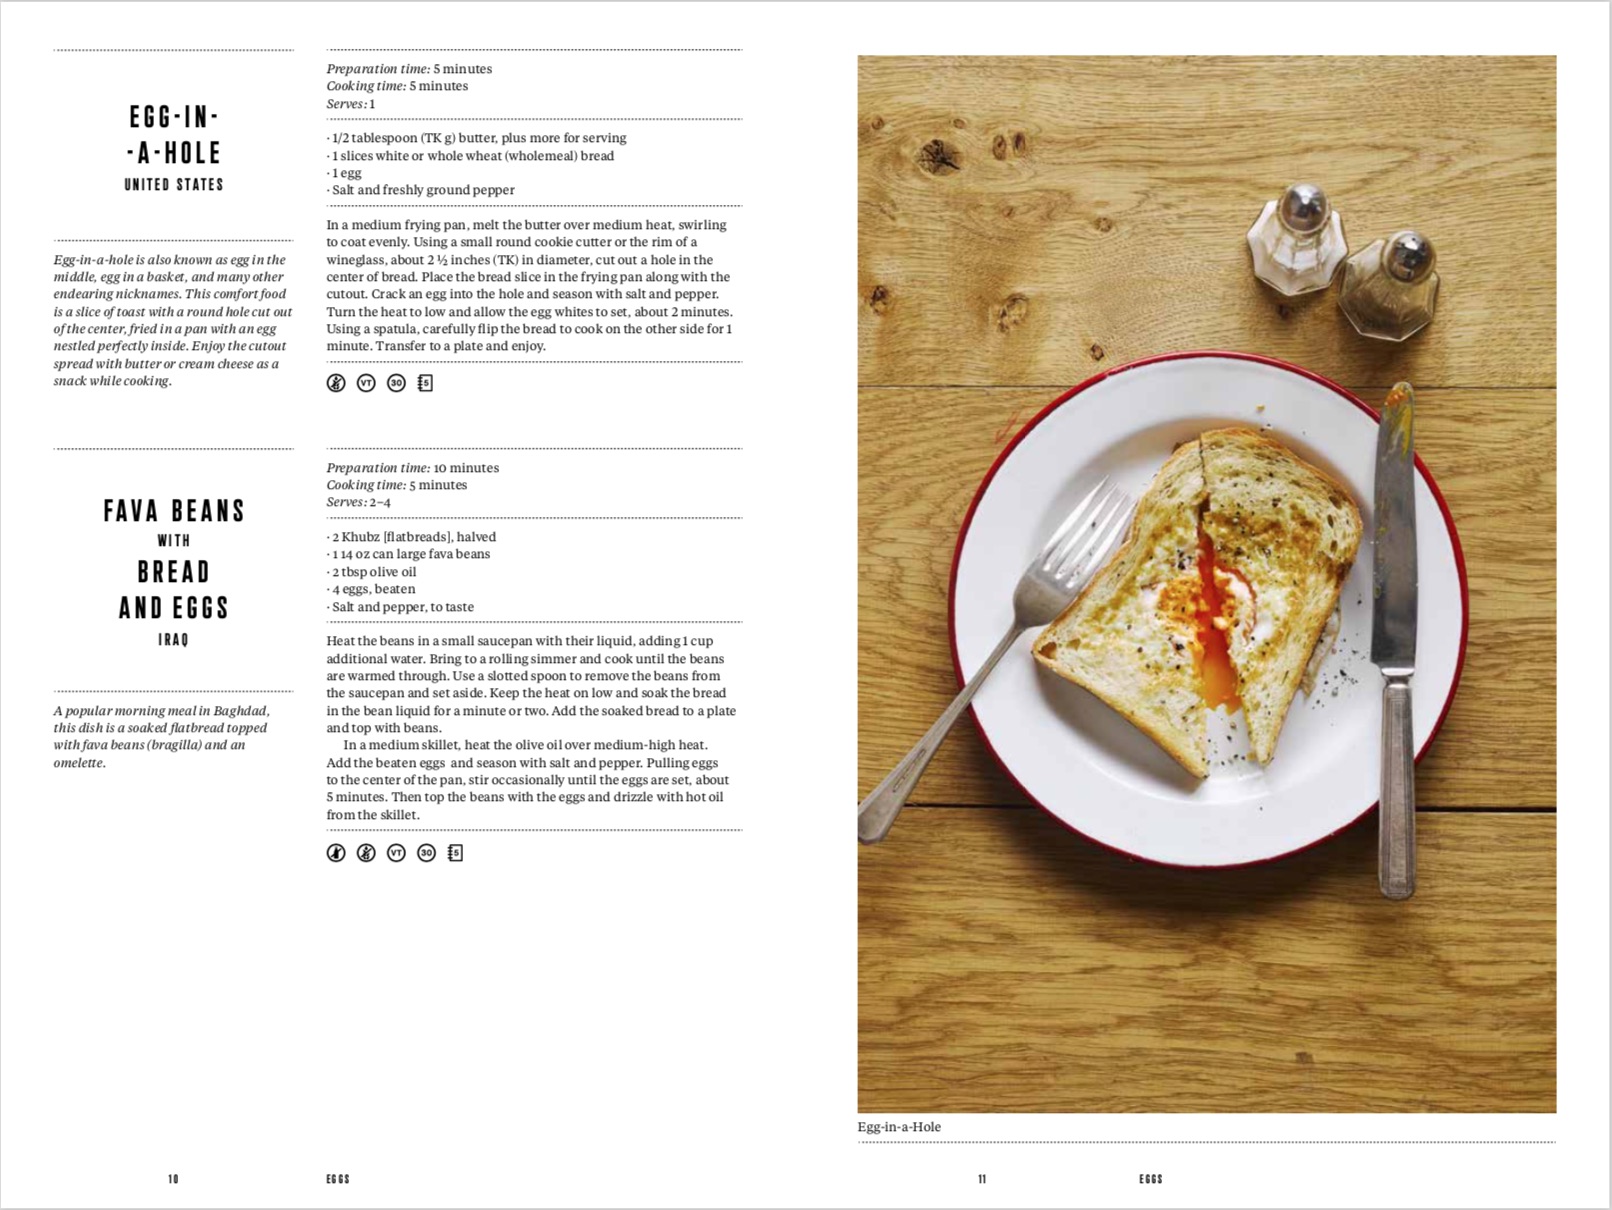 By Emily Elyse Miller from Breakfast: The Cookbook copyright Phaidon 2019